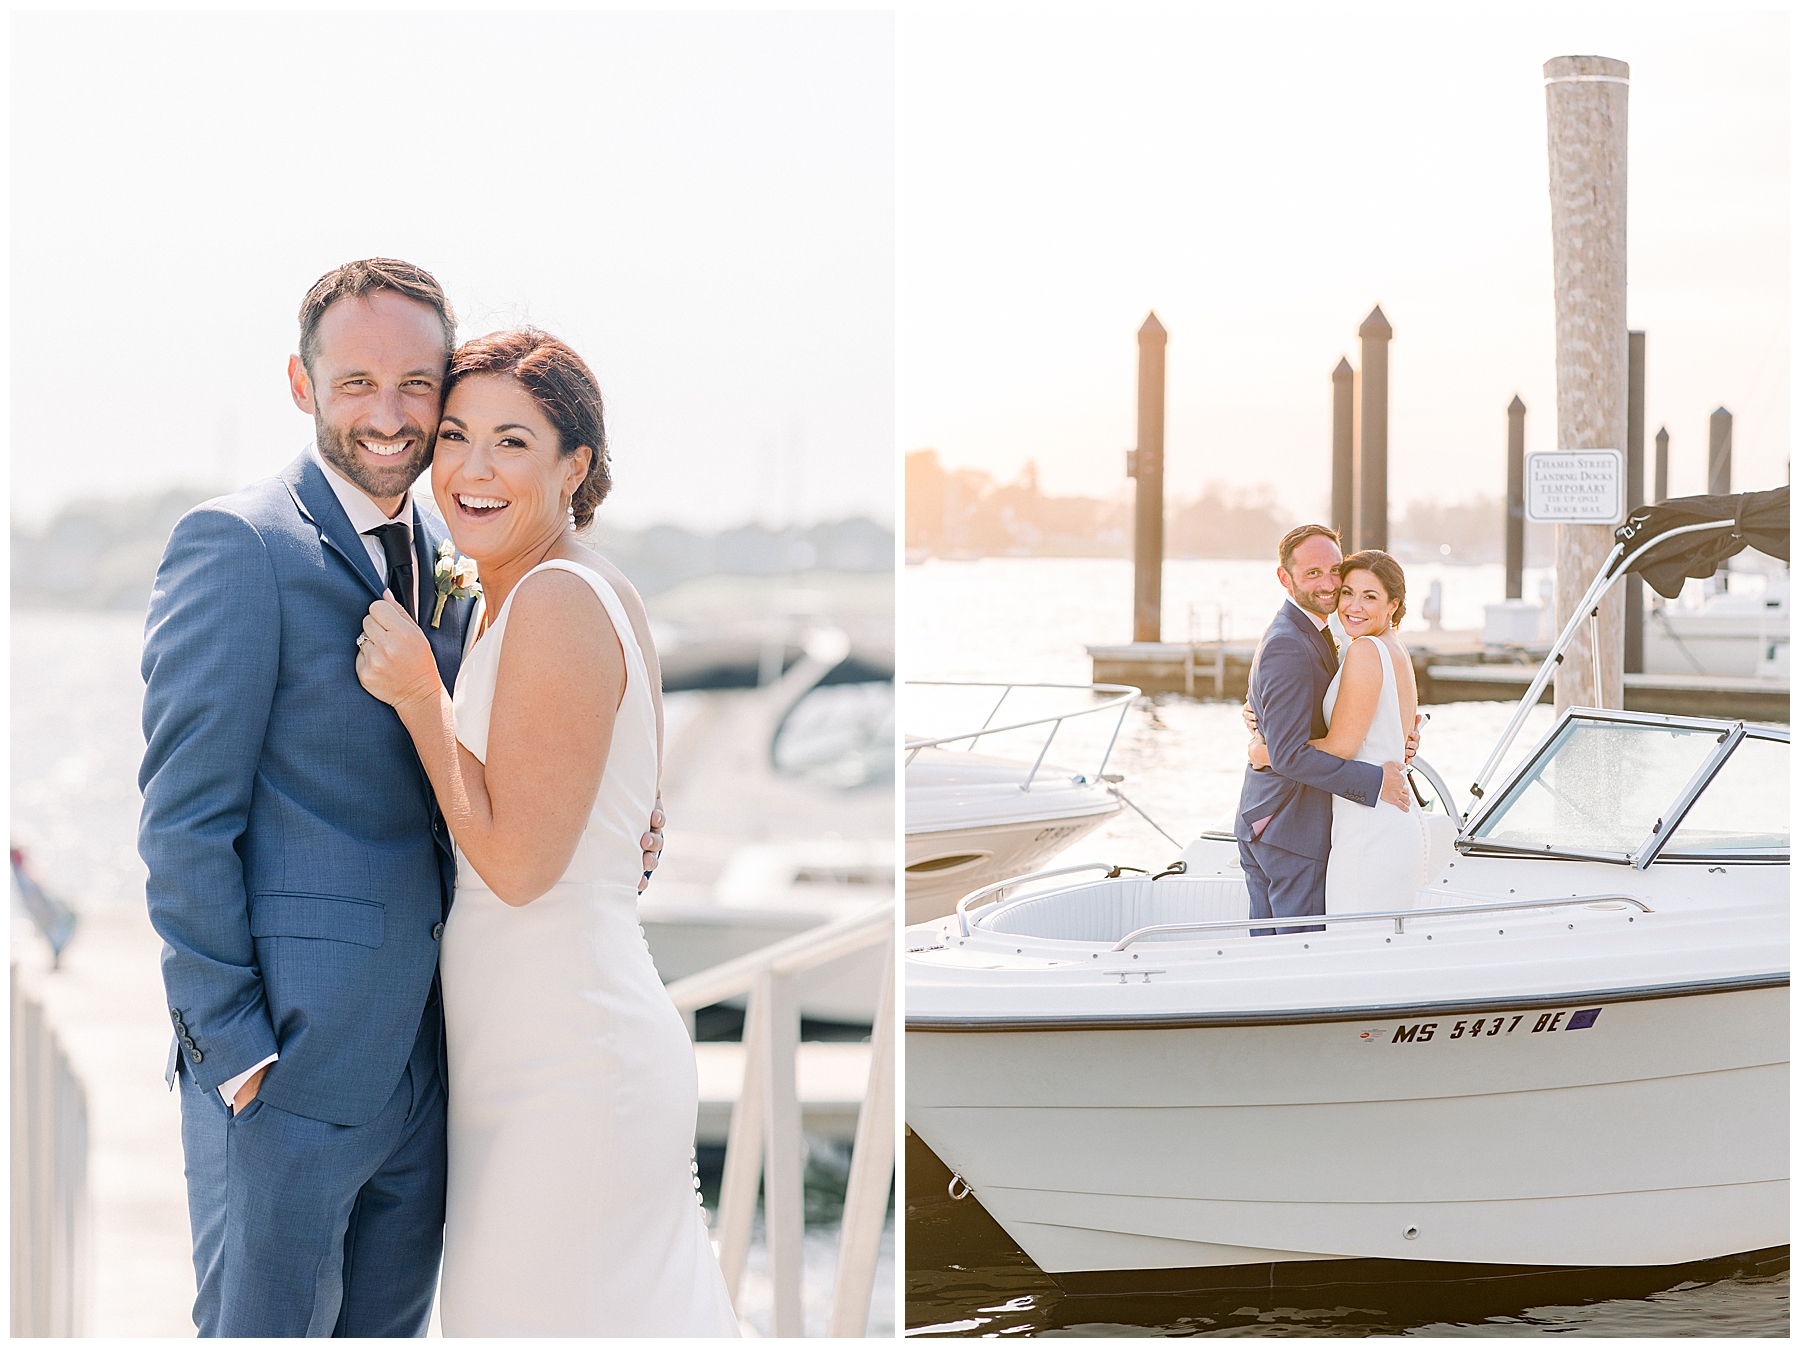 husband and wife on their boat after waterfront wedding at Bristol Harbor Inn in RI captured by Stephanie Berenson Photography